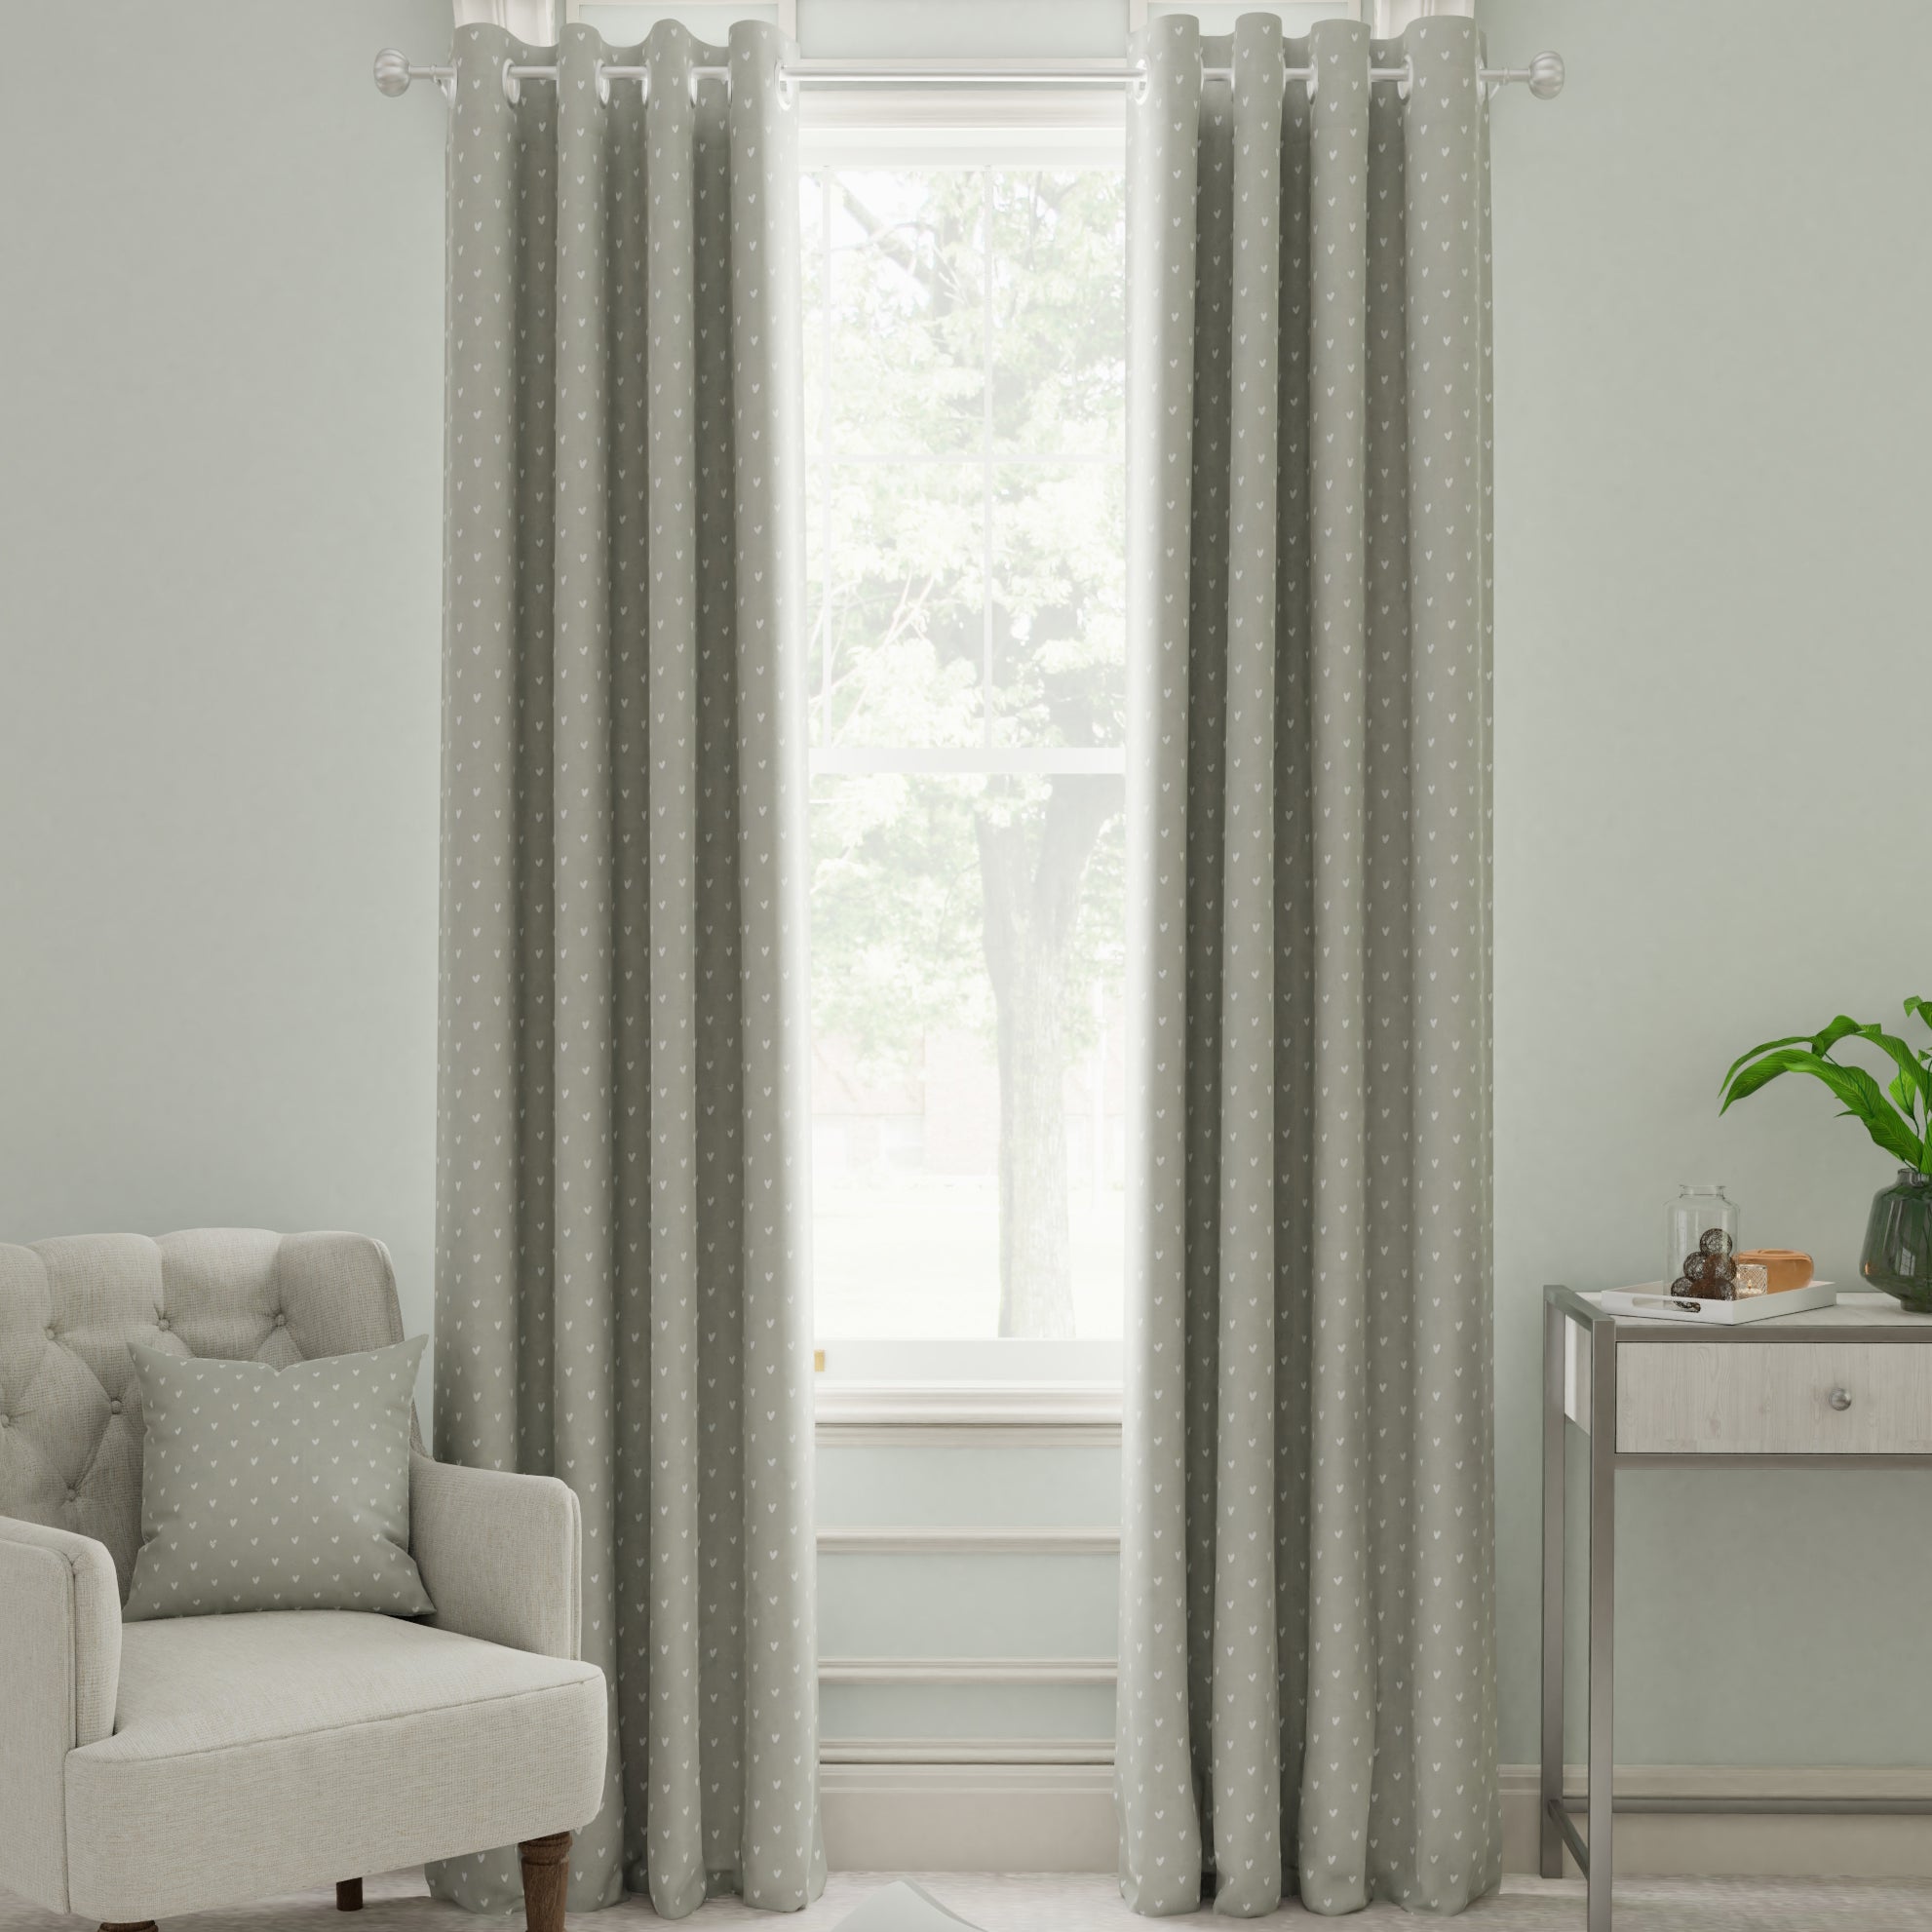 Sophie Allport Hearts Made To Measure Curtains Grey